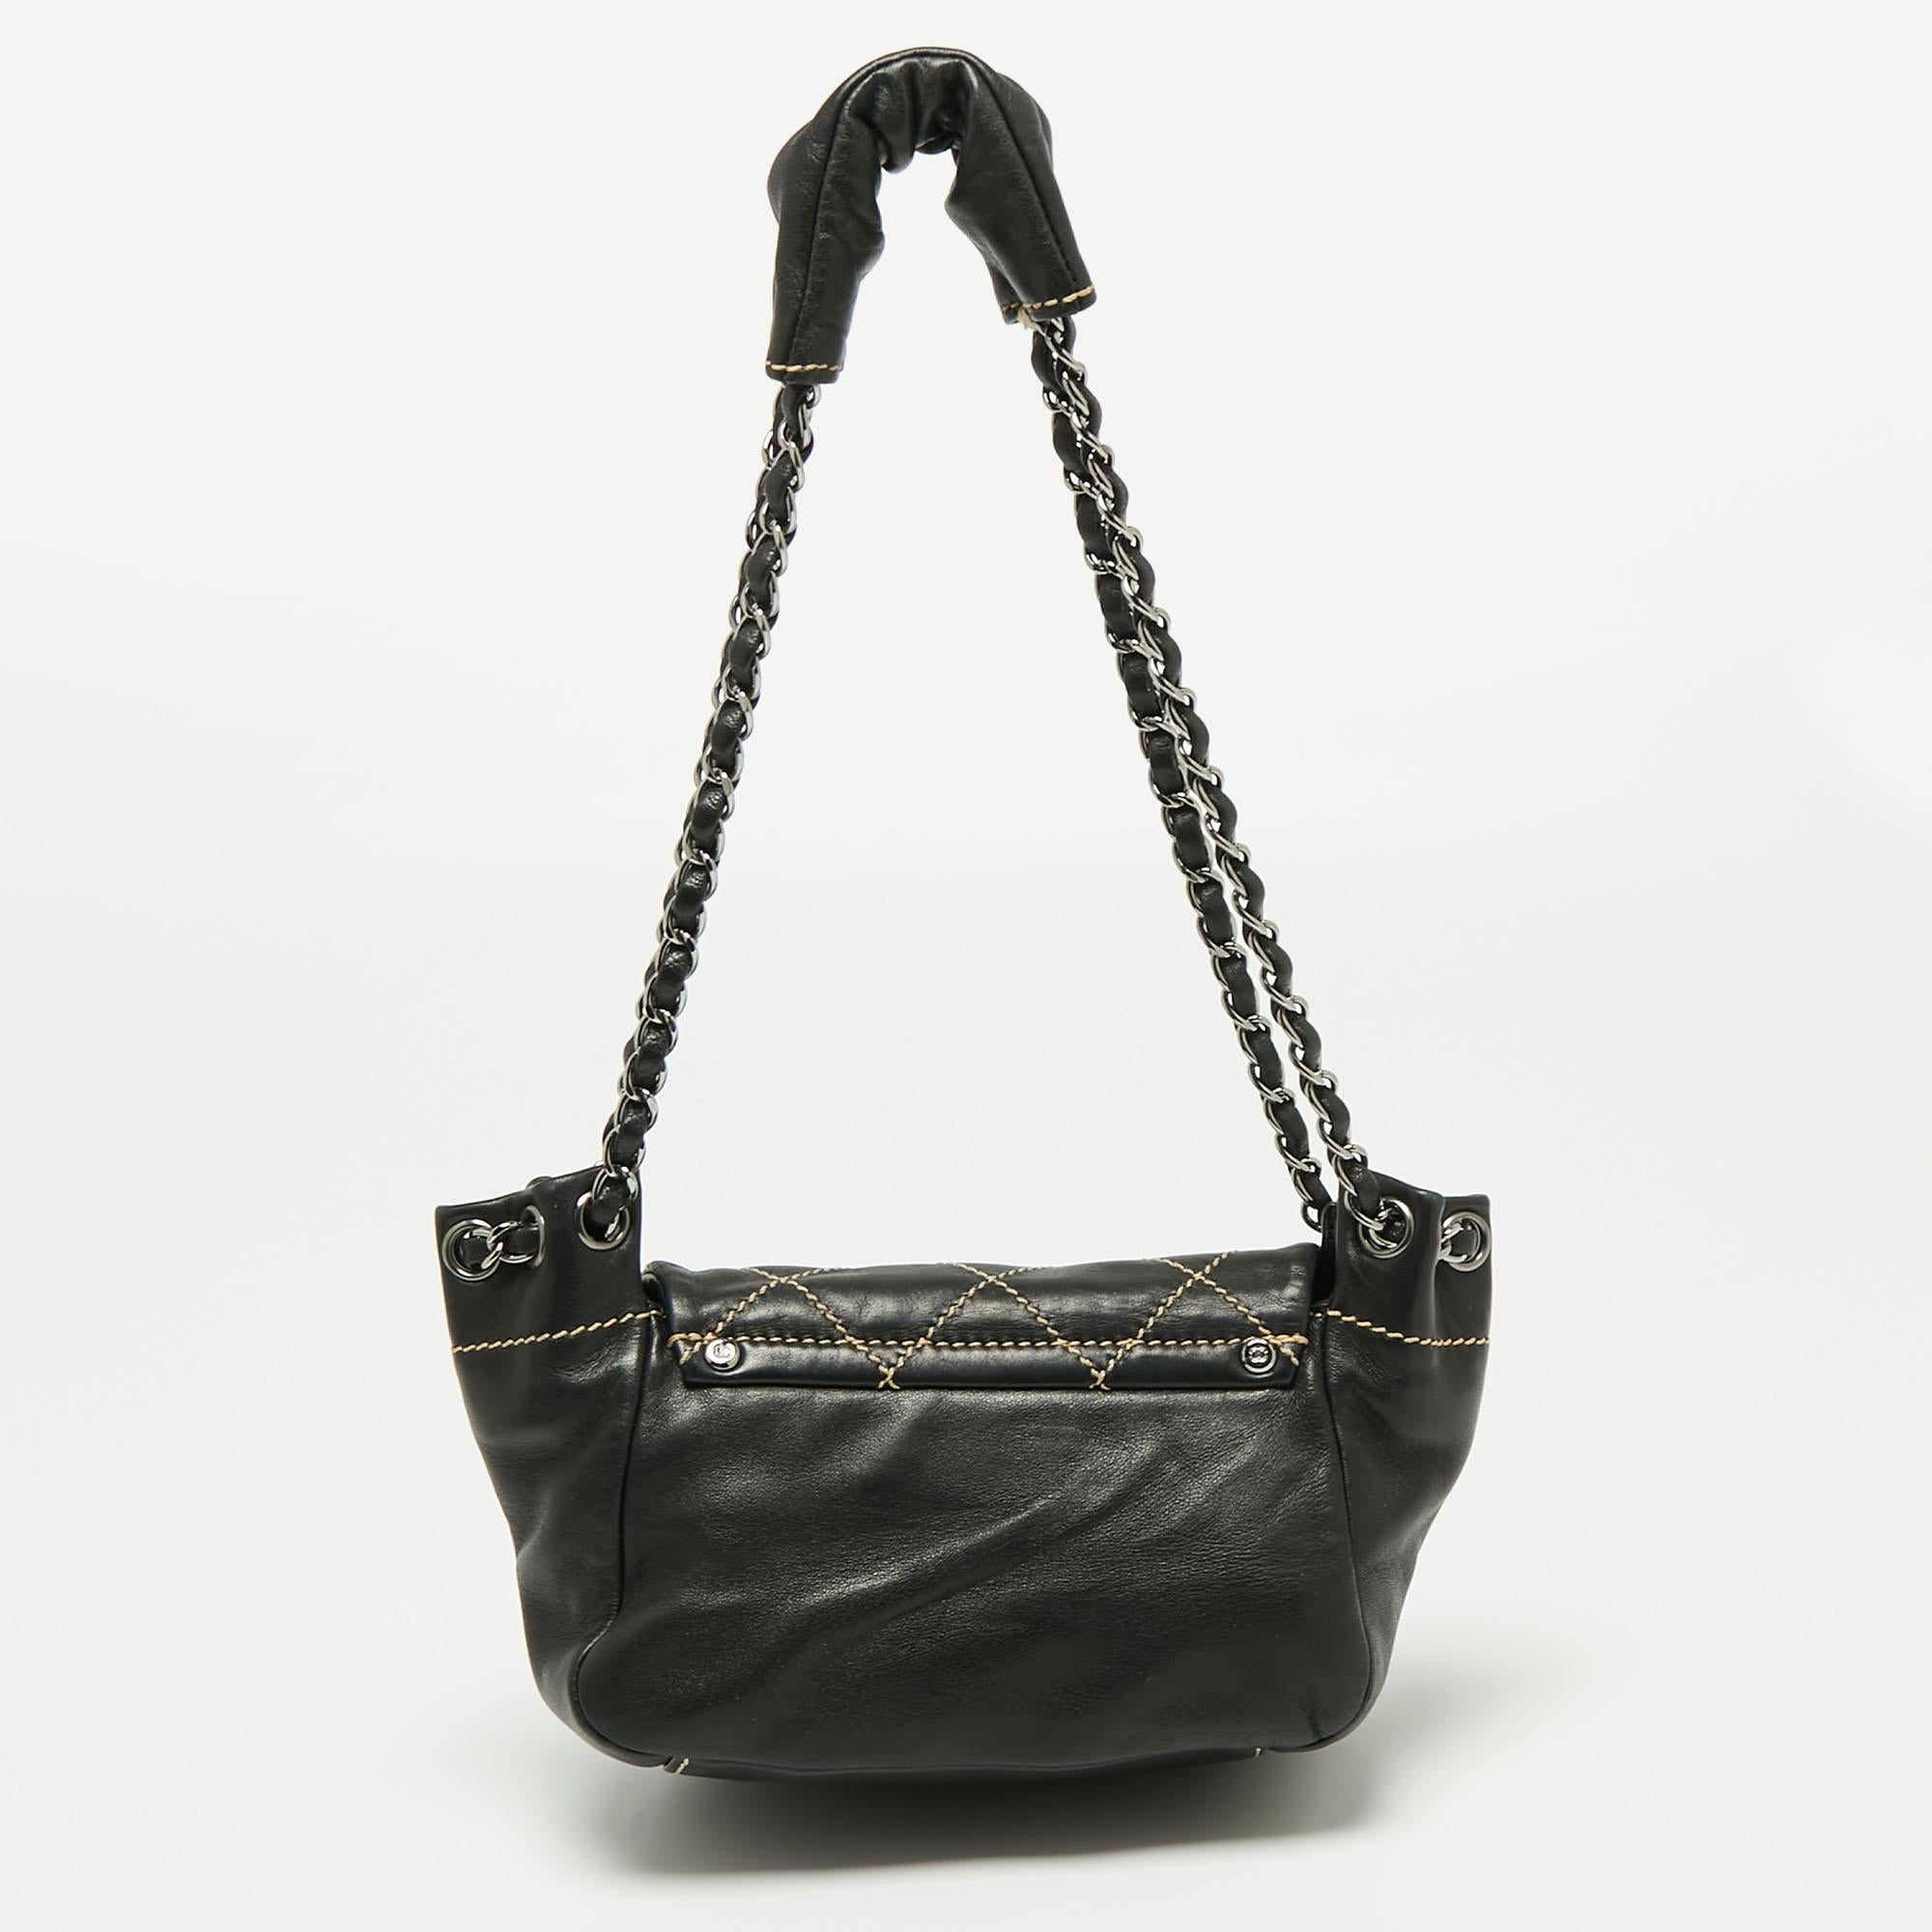 This Accordion shoulder bag from the House of Chanel exudes the right amount of class and elegance. Crafted from black quilted leather, this bag is adorned with a shoulder strap and Dark Ruthenium hardware. It accommodates a nylon-lined interior.